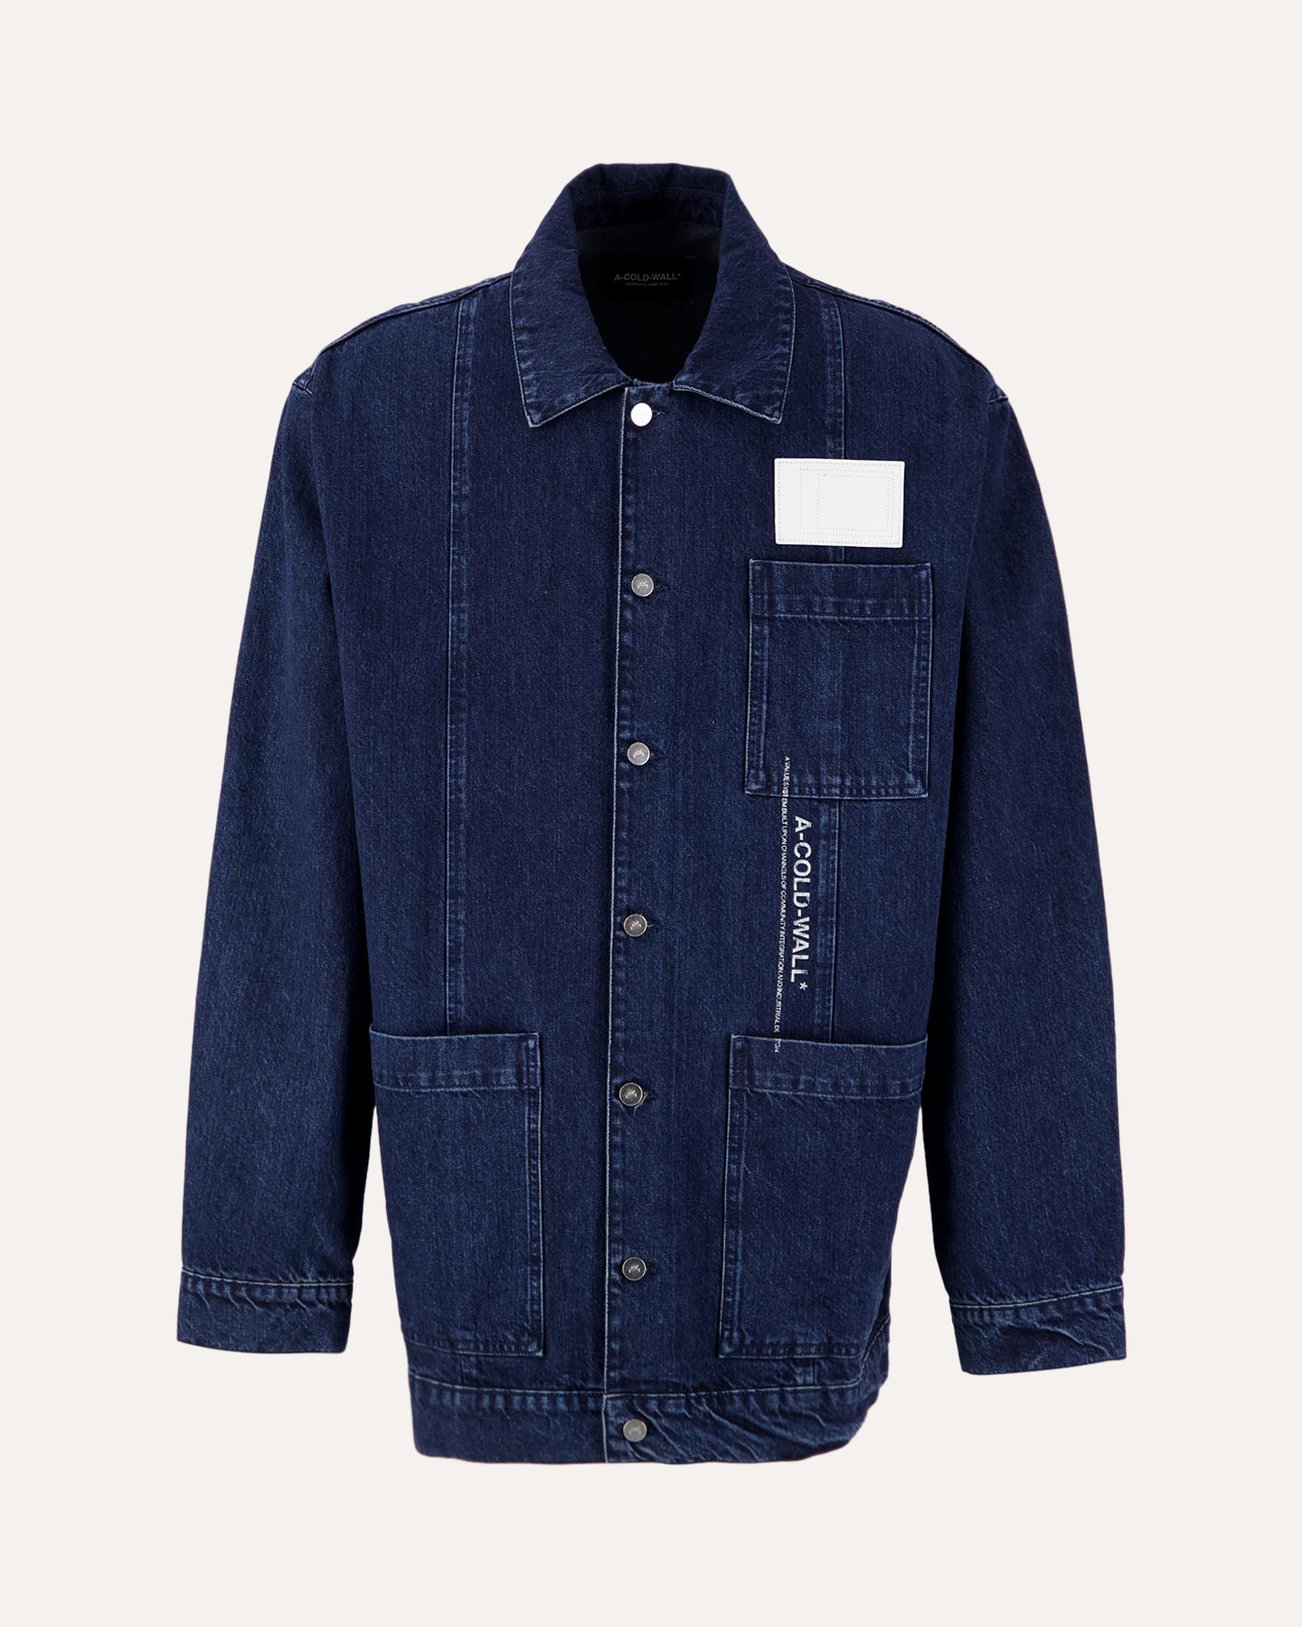 A-COLD-WALL* Discourse Chore Jacket DONKERBLAUW 1